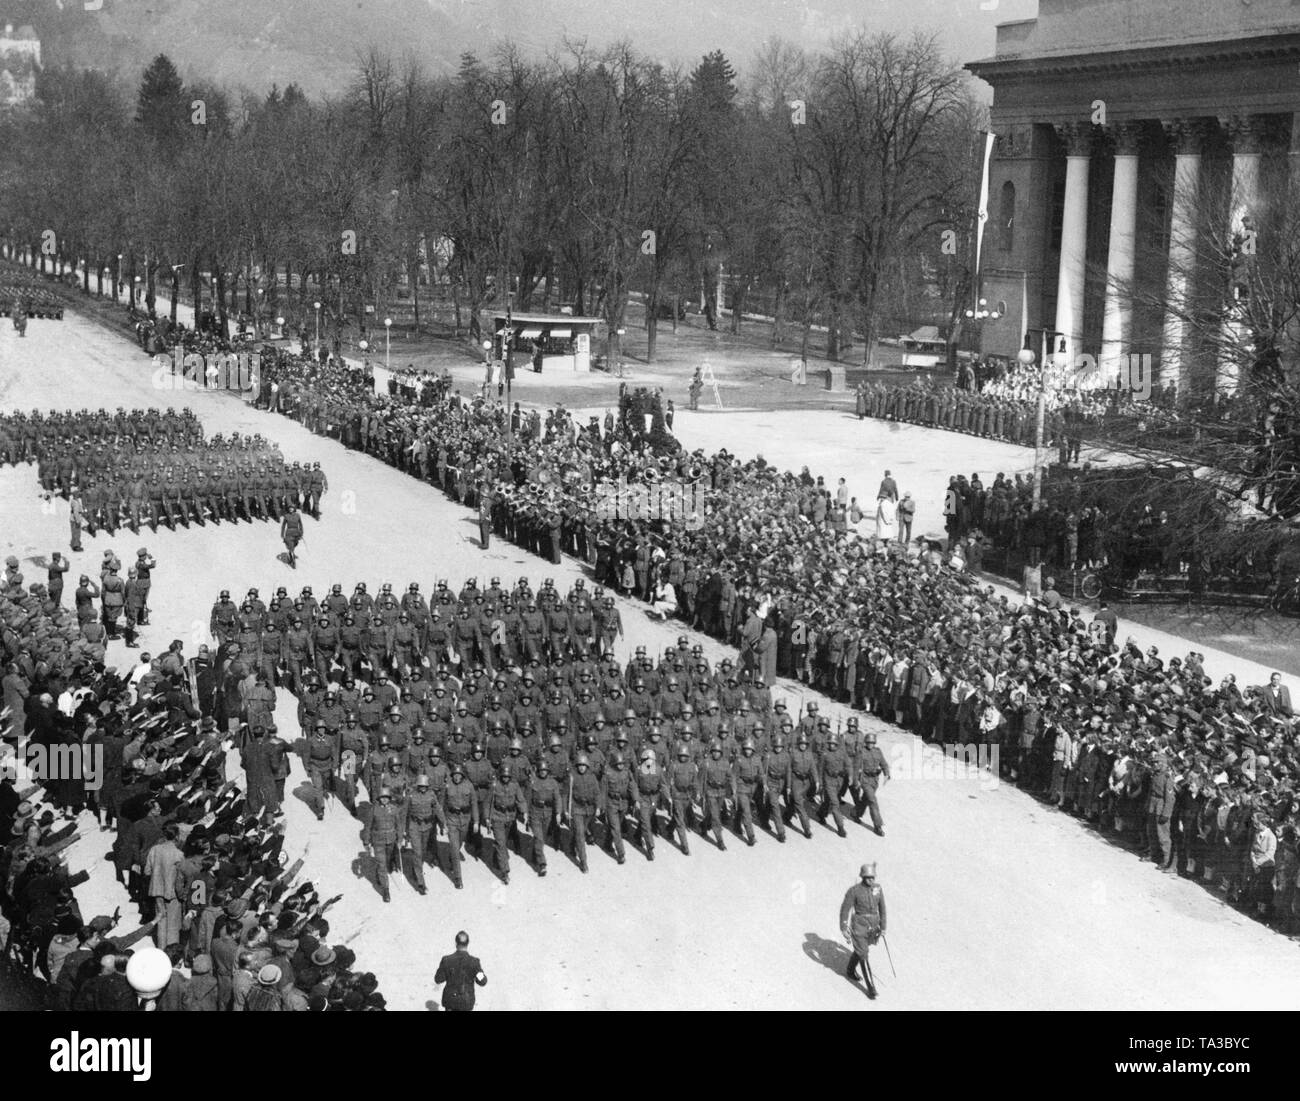 March of the Tiroler-Jaeger-Regiment and the German Gebirgsjaeger-Regiments 98 on the Adolf Hitler Platz in Innsbruck. After the annexation of Austria to the German Reich, the Austrian army is sworn in to Hitler. Stock Photo